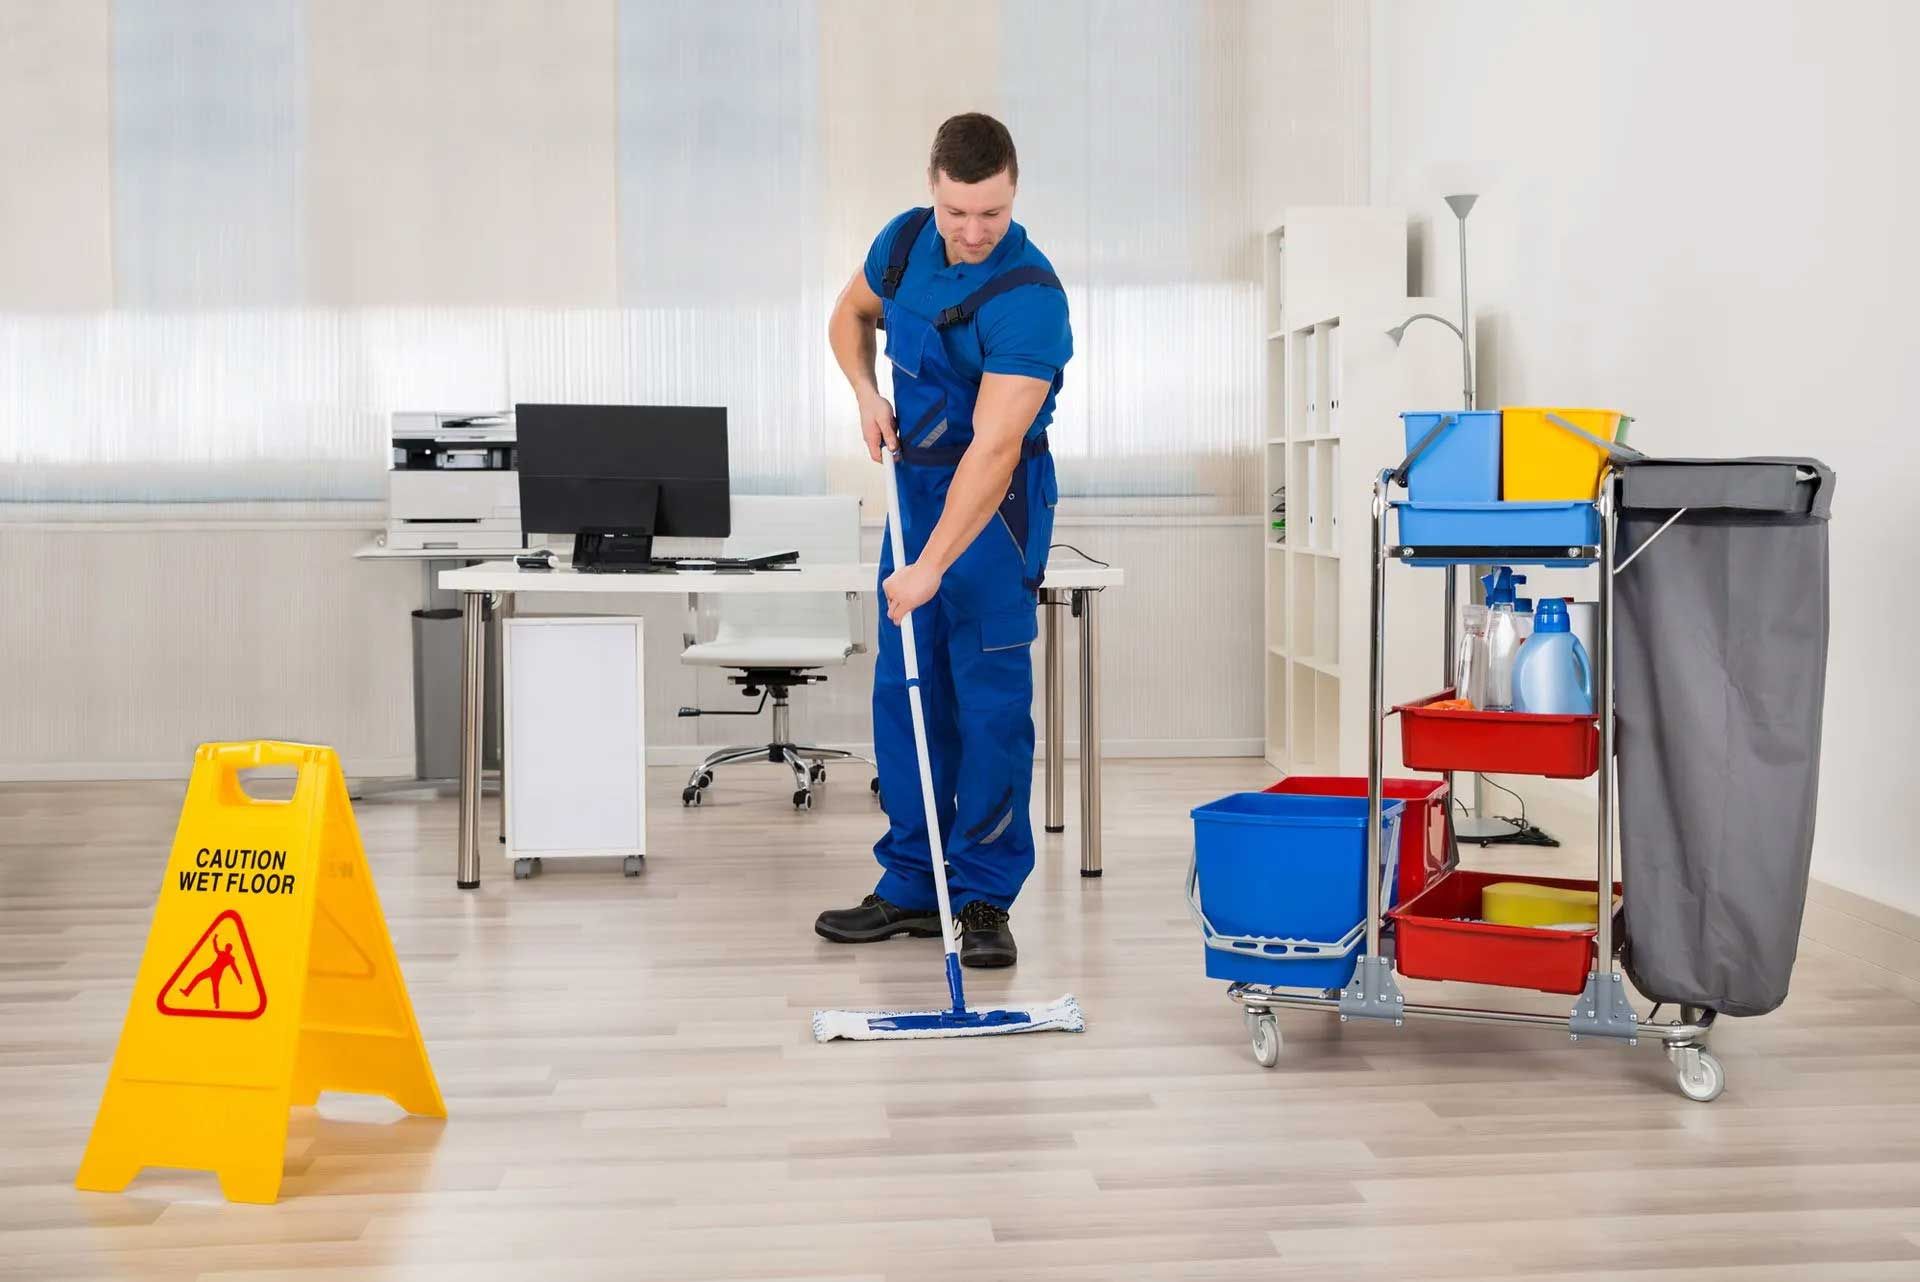 A man from dll ofiice cleaners is cleaning the floor of an office with a mop.